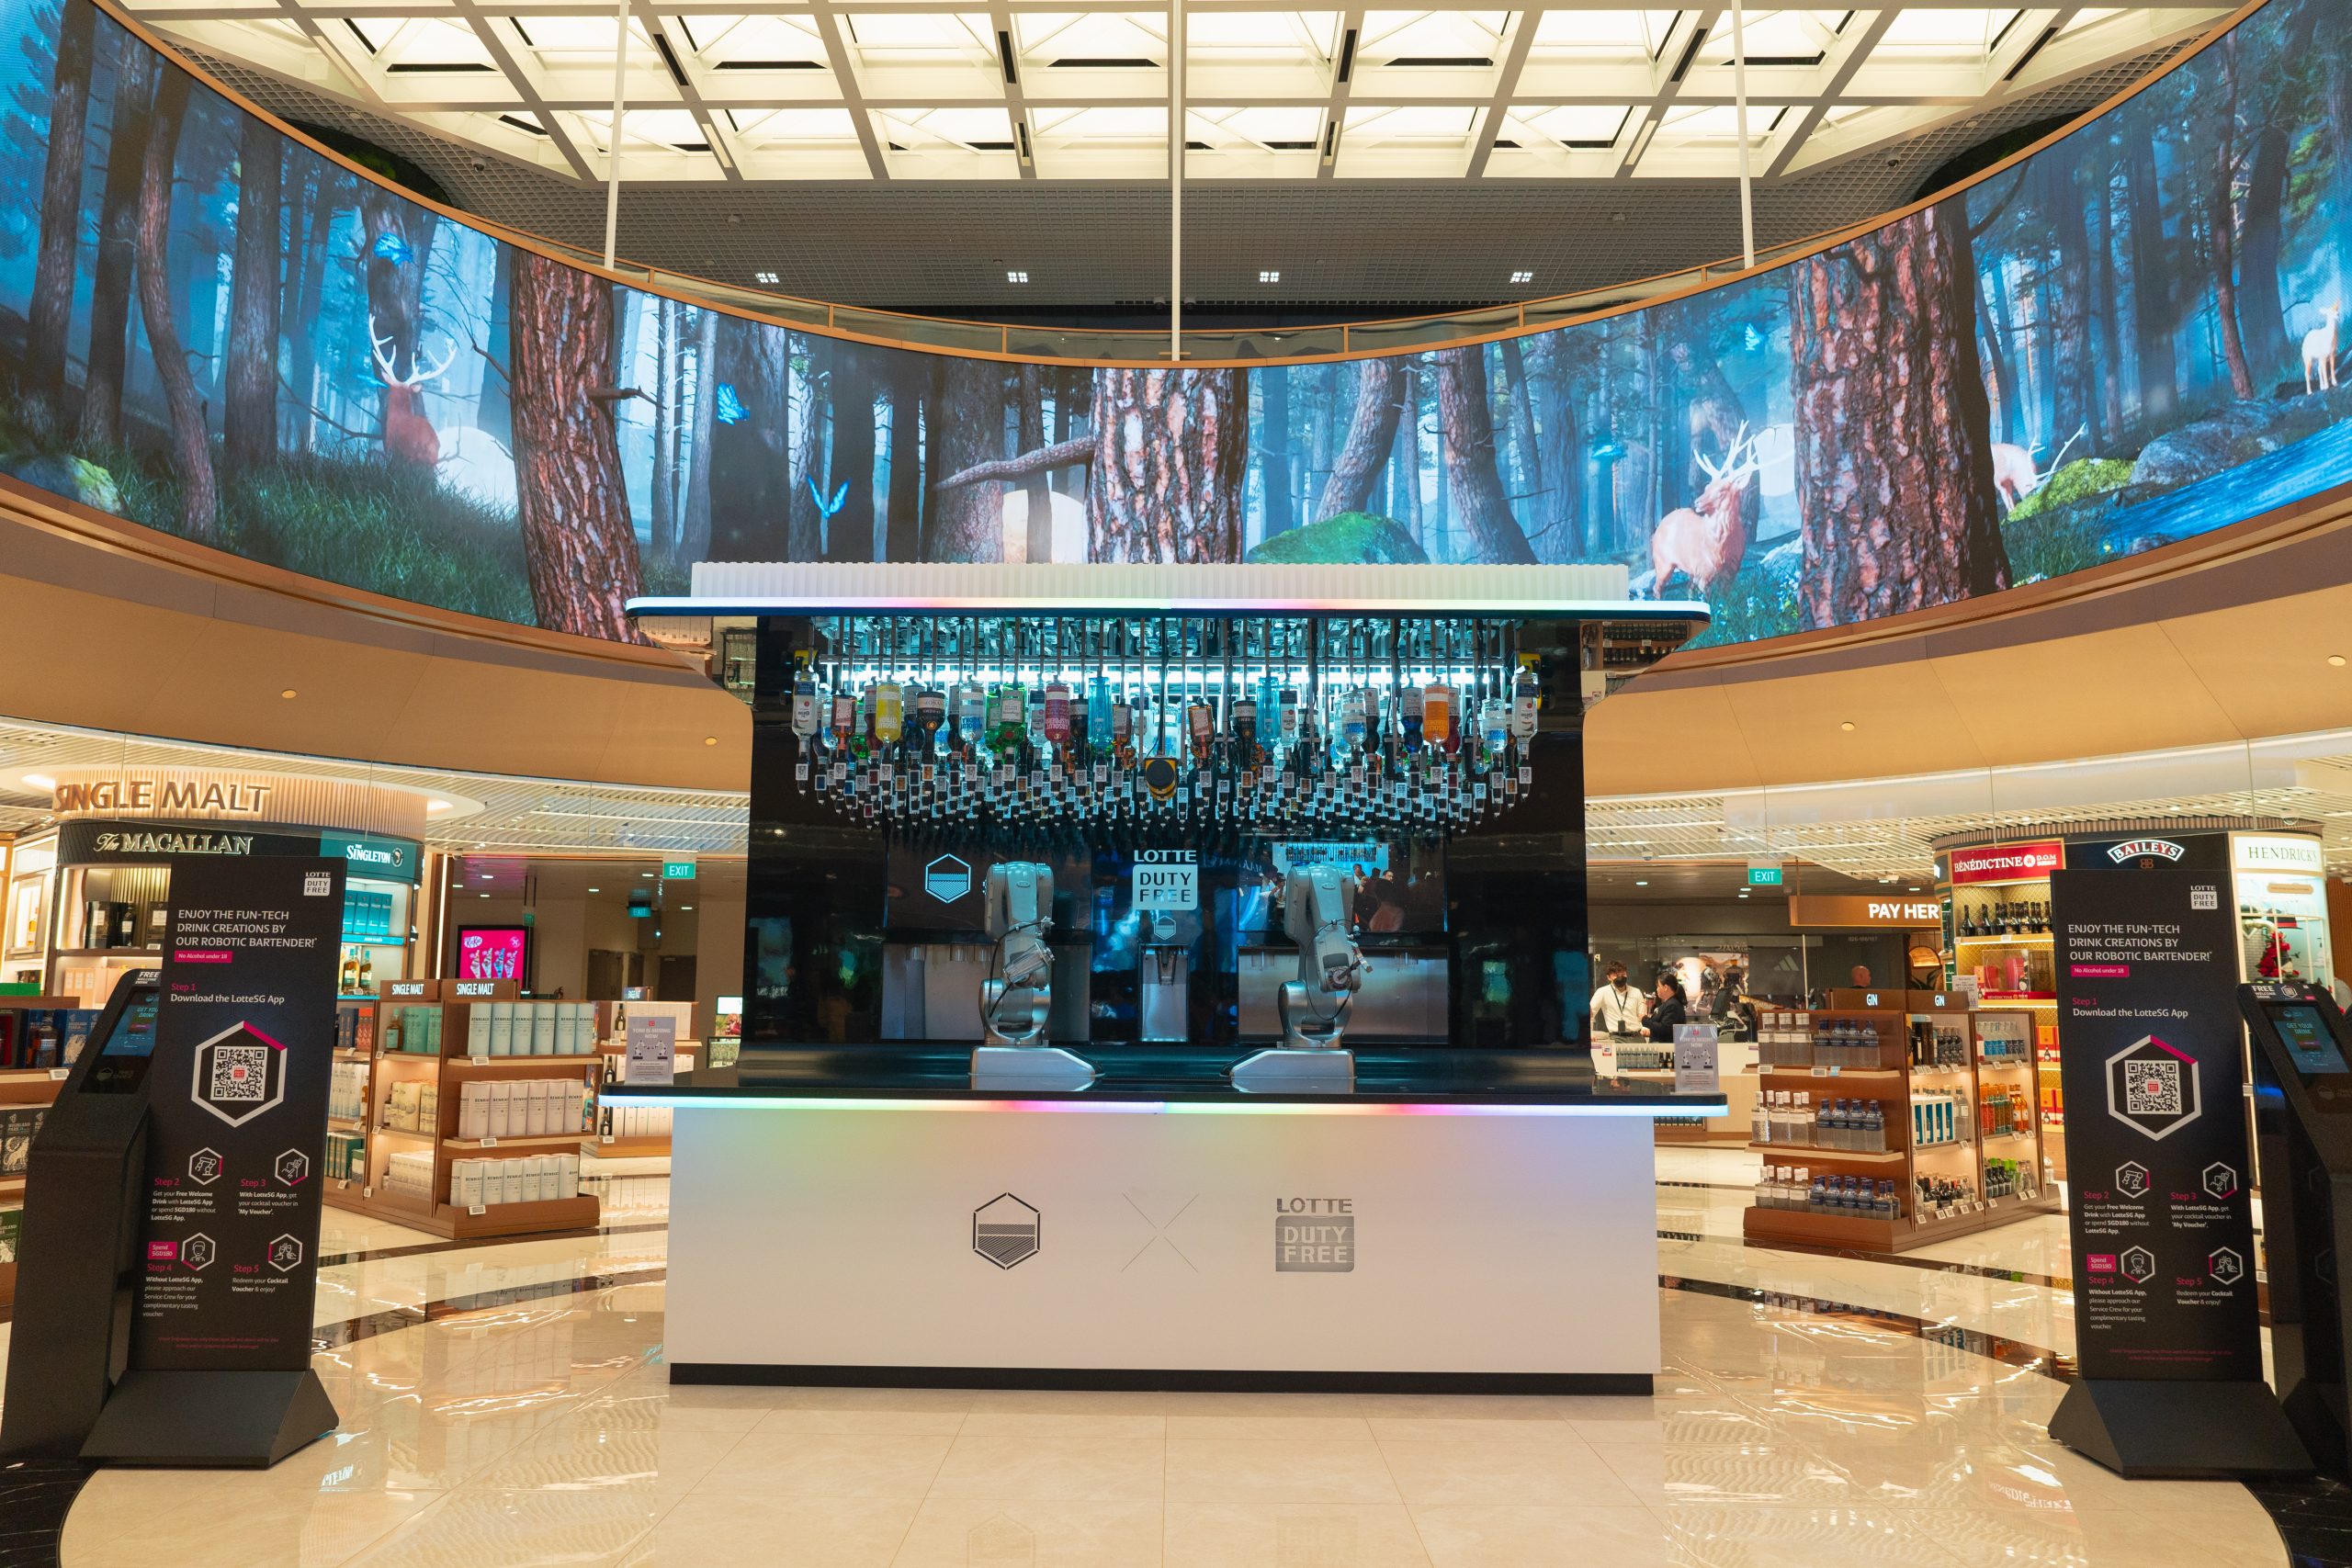 Changi Airport - Terminal 4 Opening Video (Director's Cut) on Vimeo